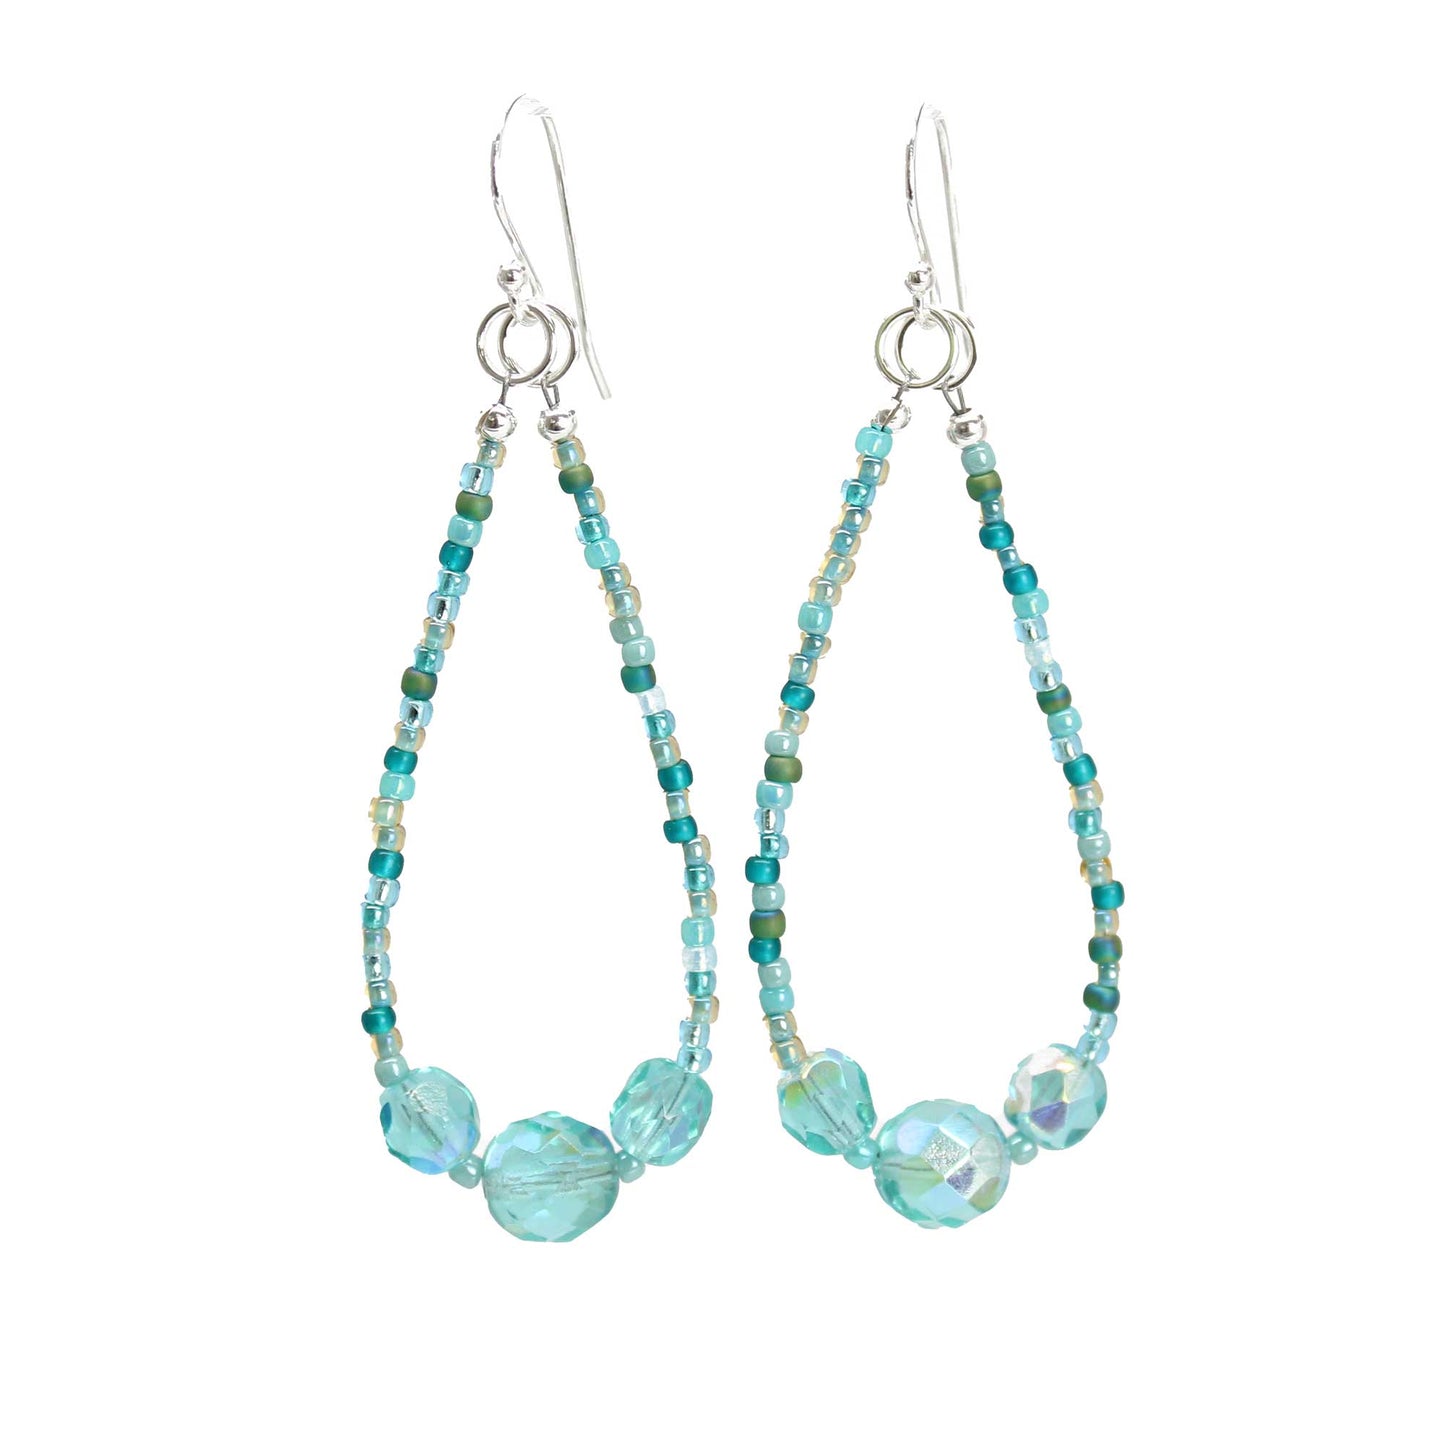 Blue Green Seed Bead Earrings with Czech Crystal Accents